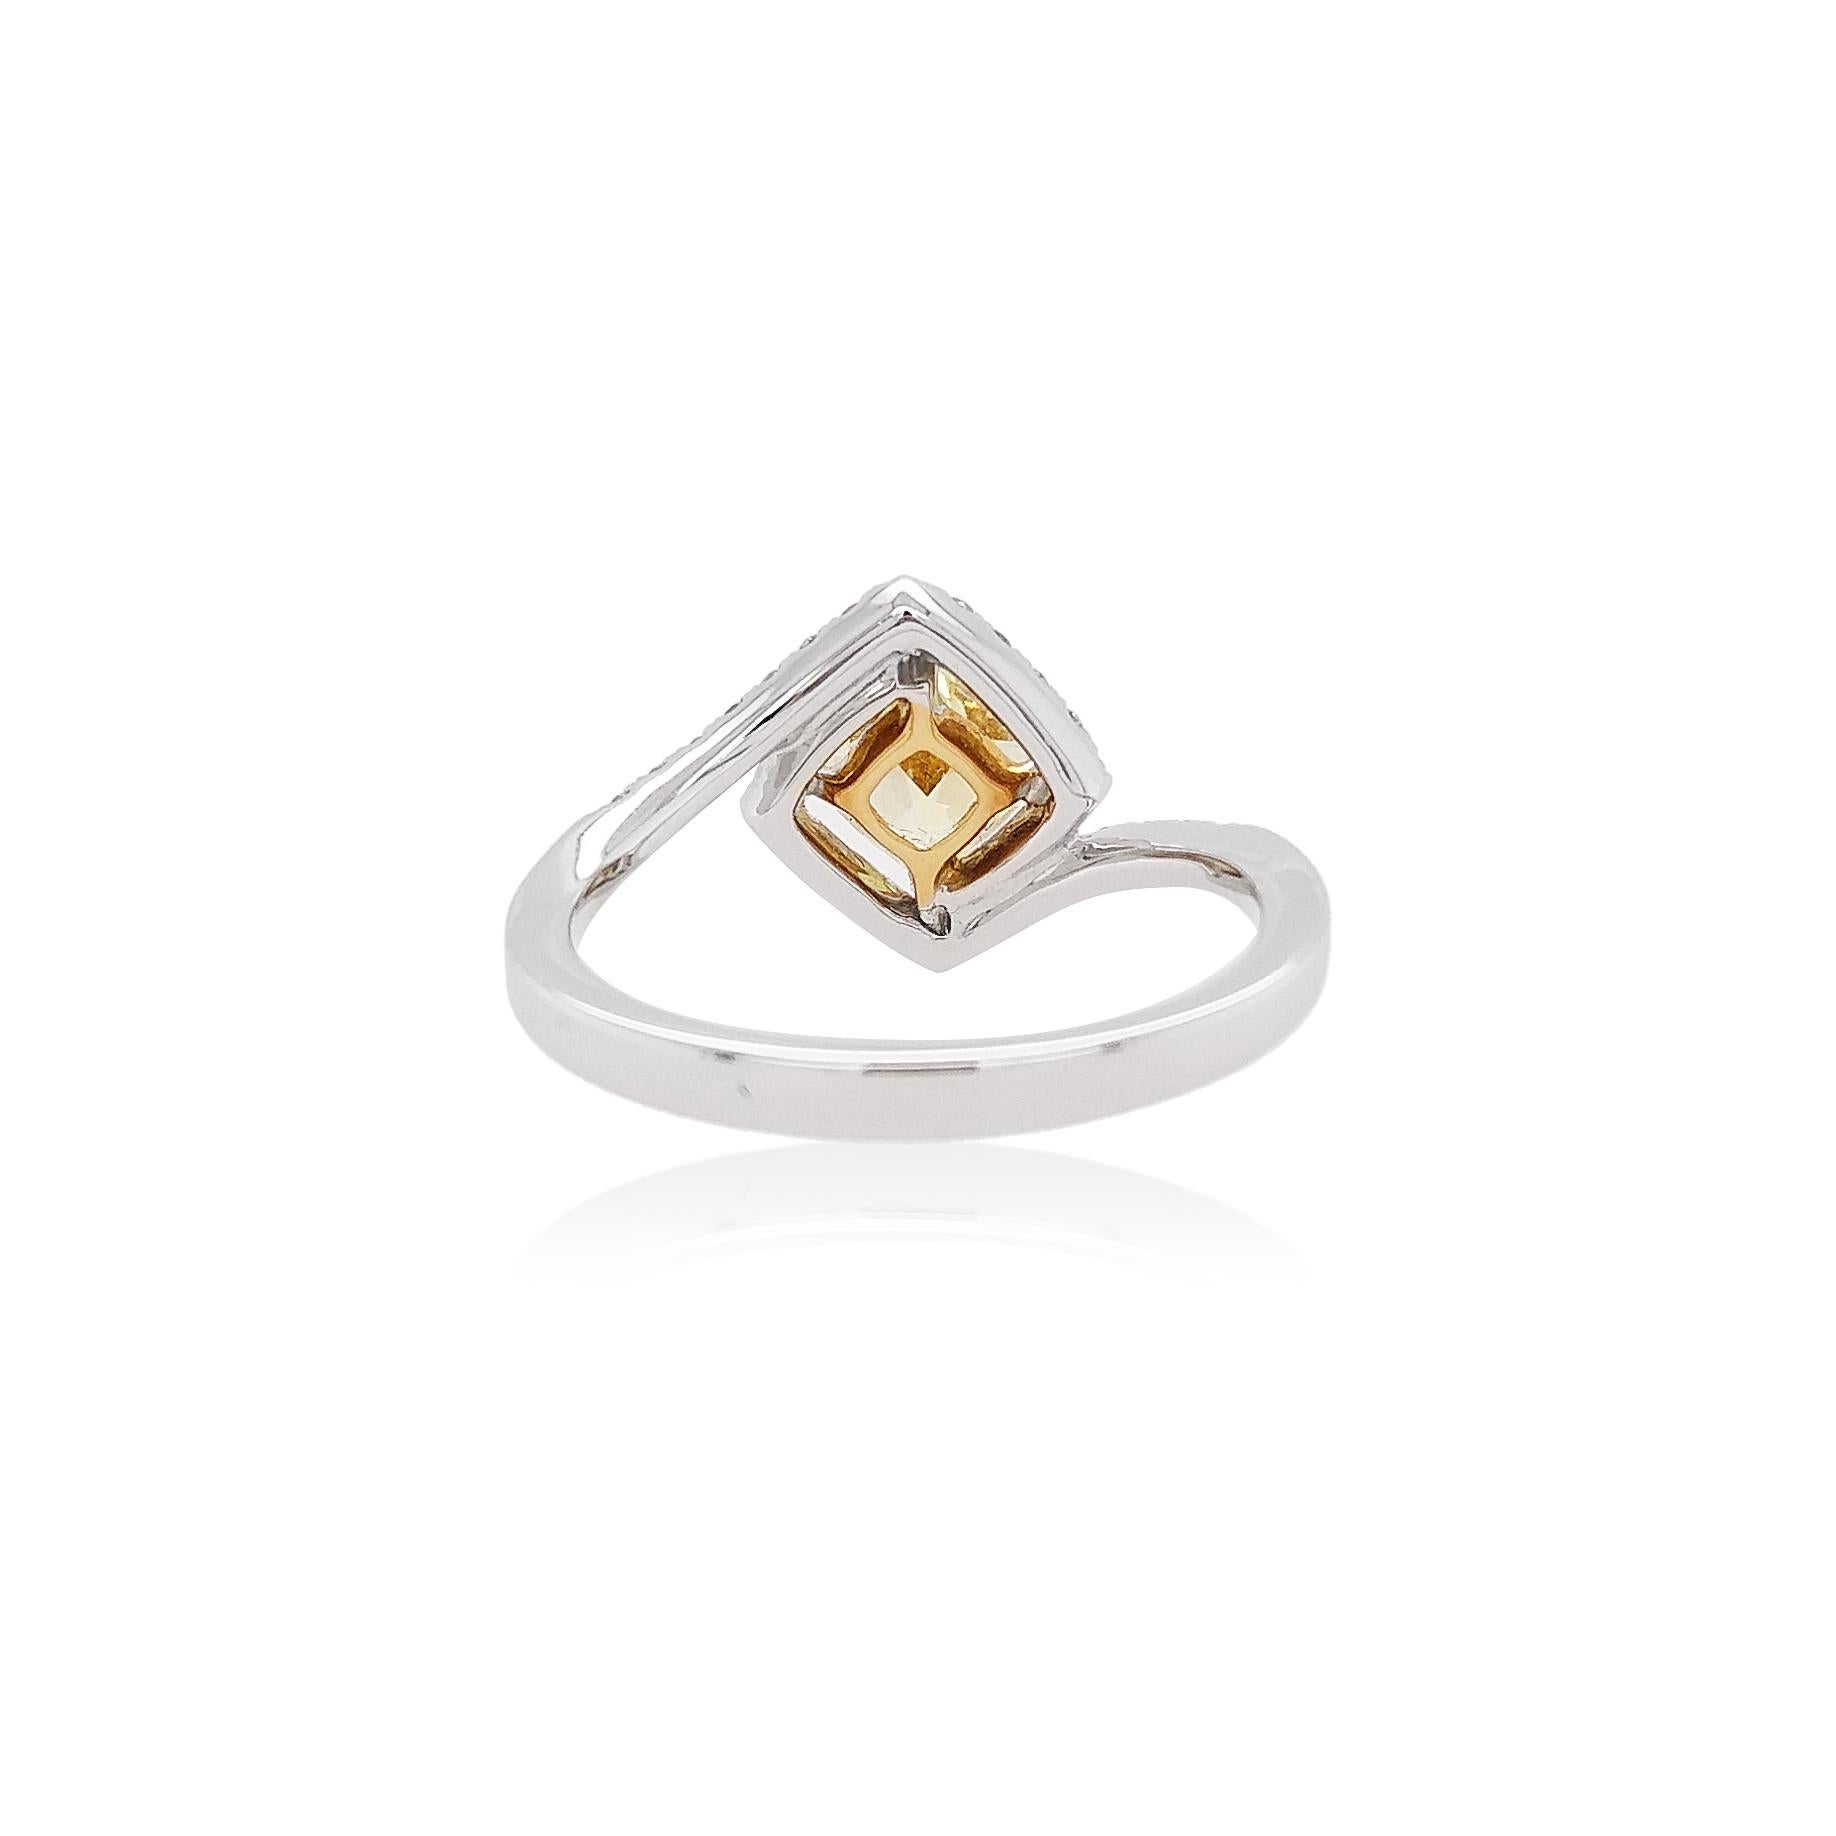 Featuring a Fancy Intense Yellow Diamond set amongst a diamond twist in Platinum and 18K Yellow Gold ring, this unique ring will add a striking finish to any outfit. Designed and hand-finished of this ring has been crafted to the highest standard. A